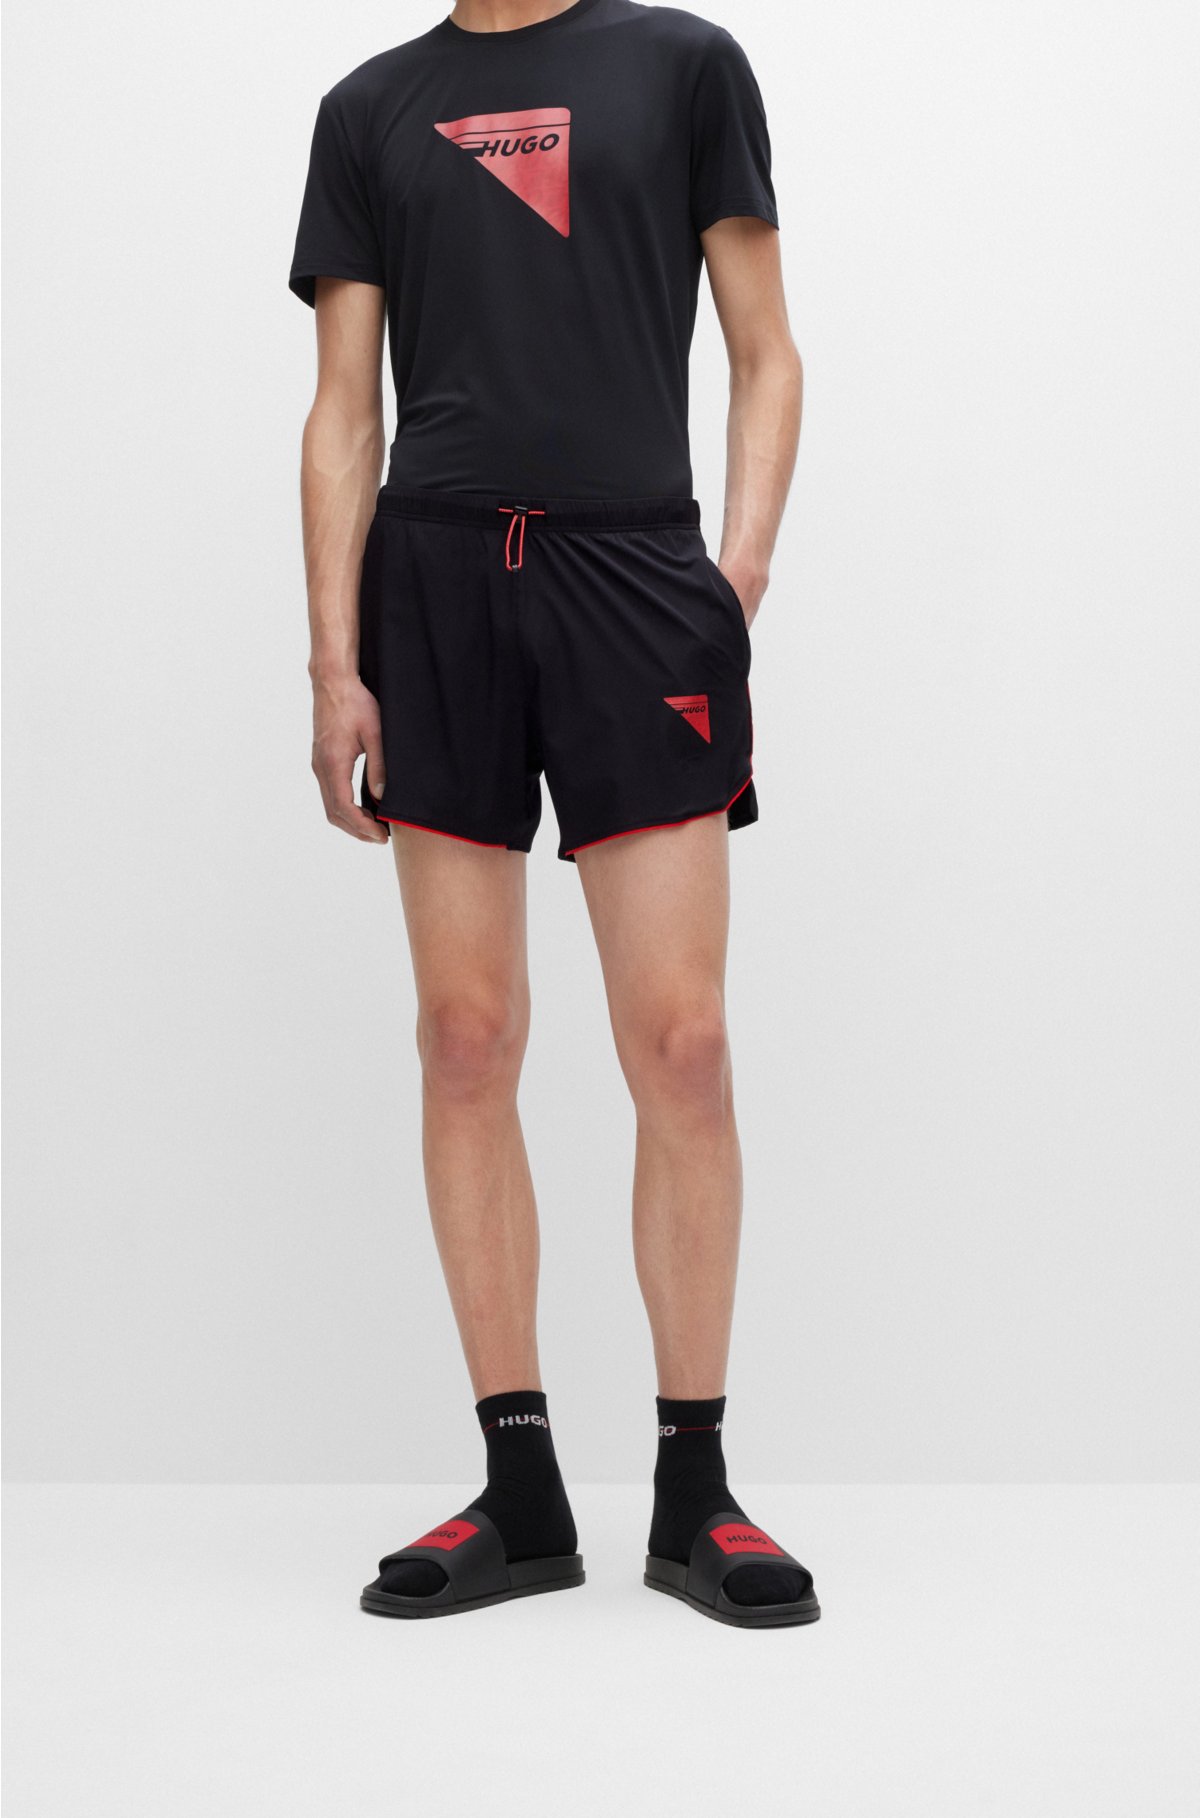 HUGO - Super-stretch shorts with capsule and logo piping